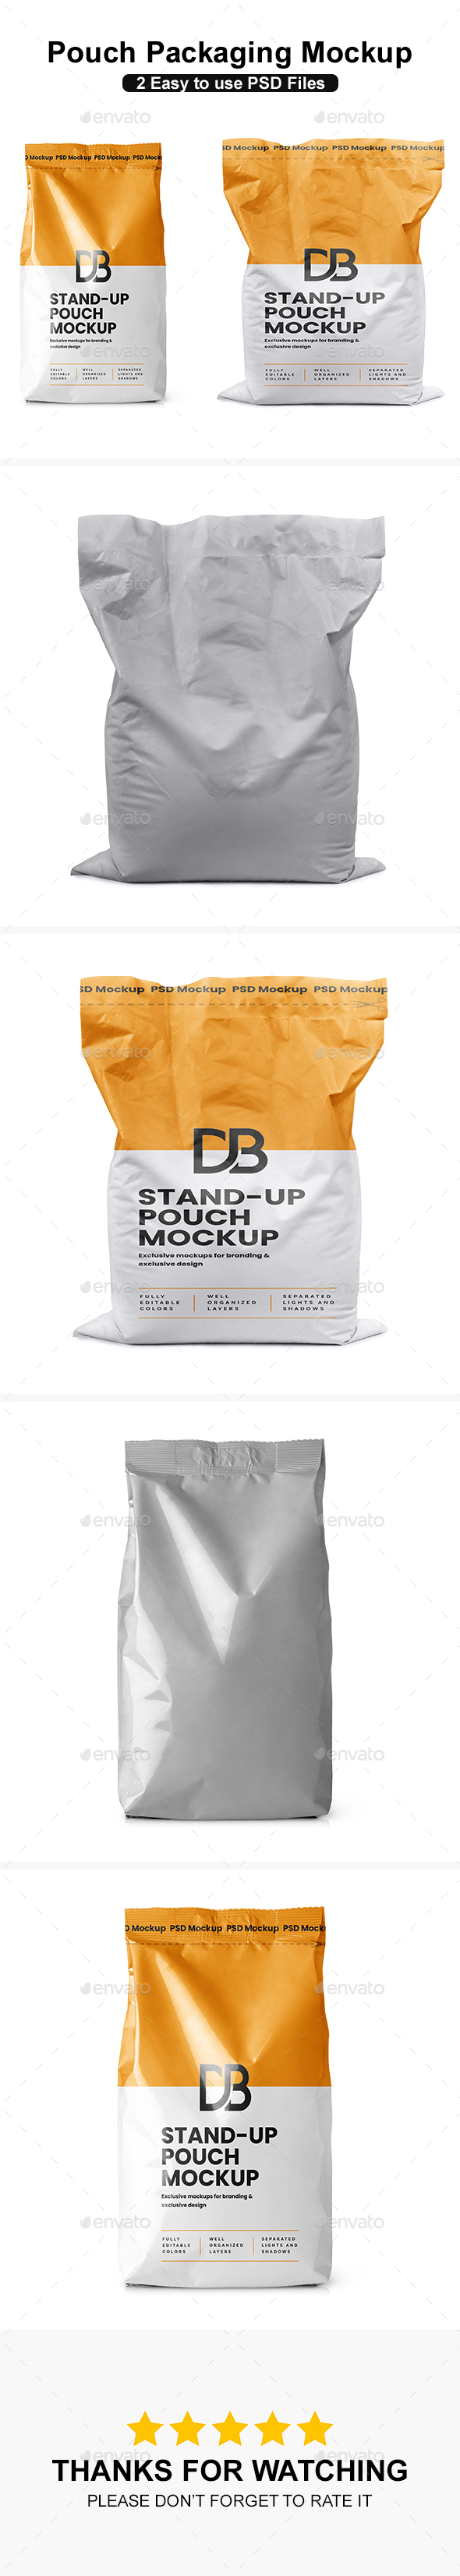 [DOWNLOAD]Stand-up Pouch Mockup